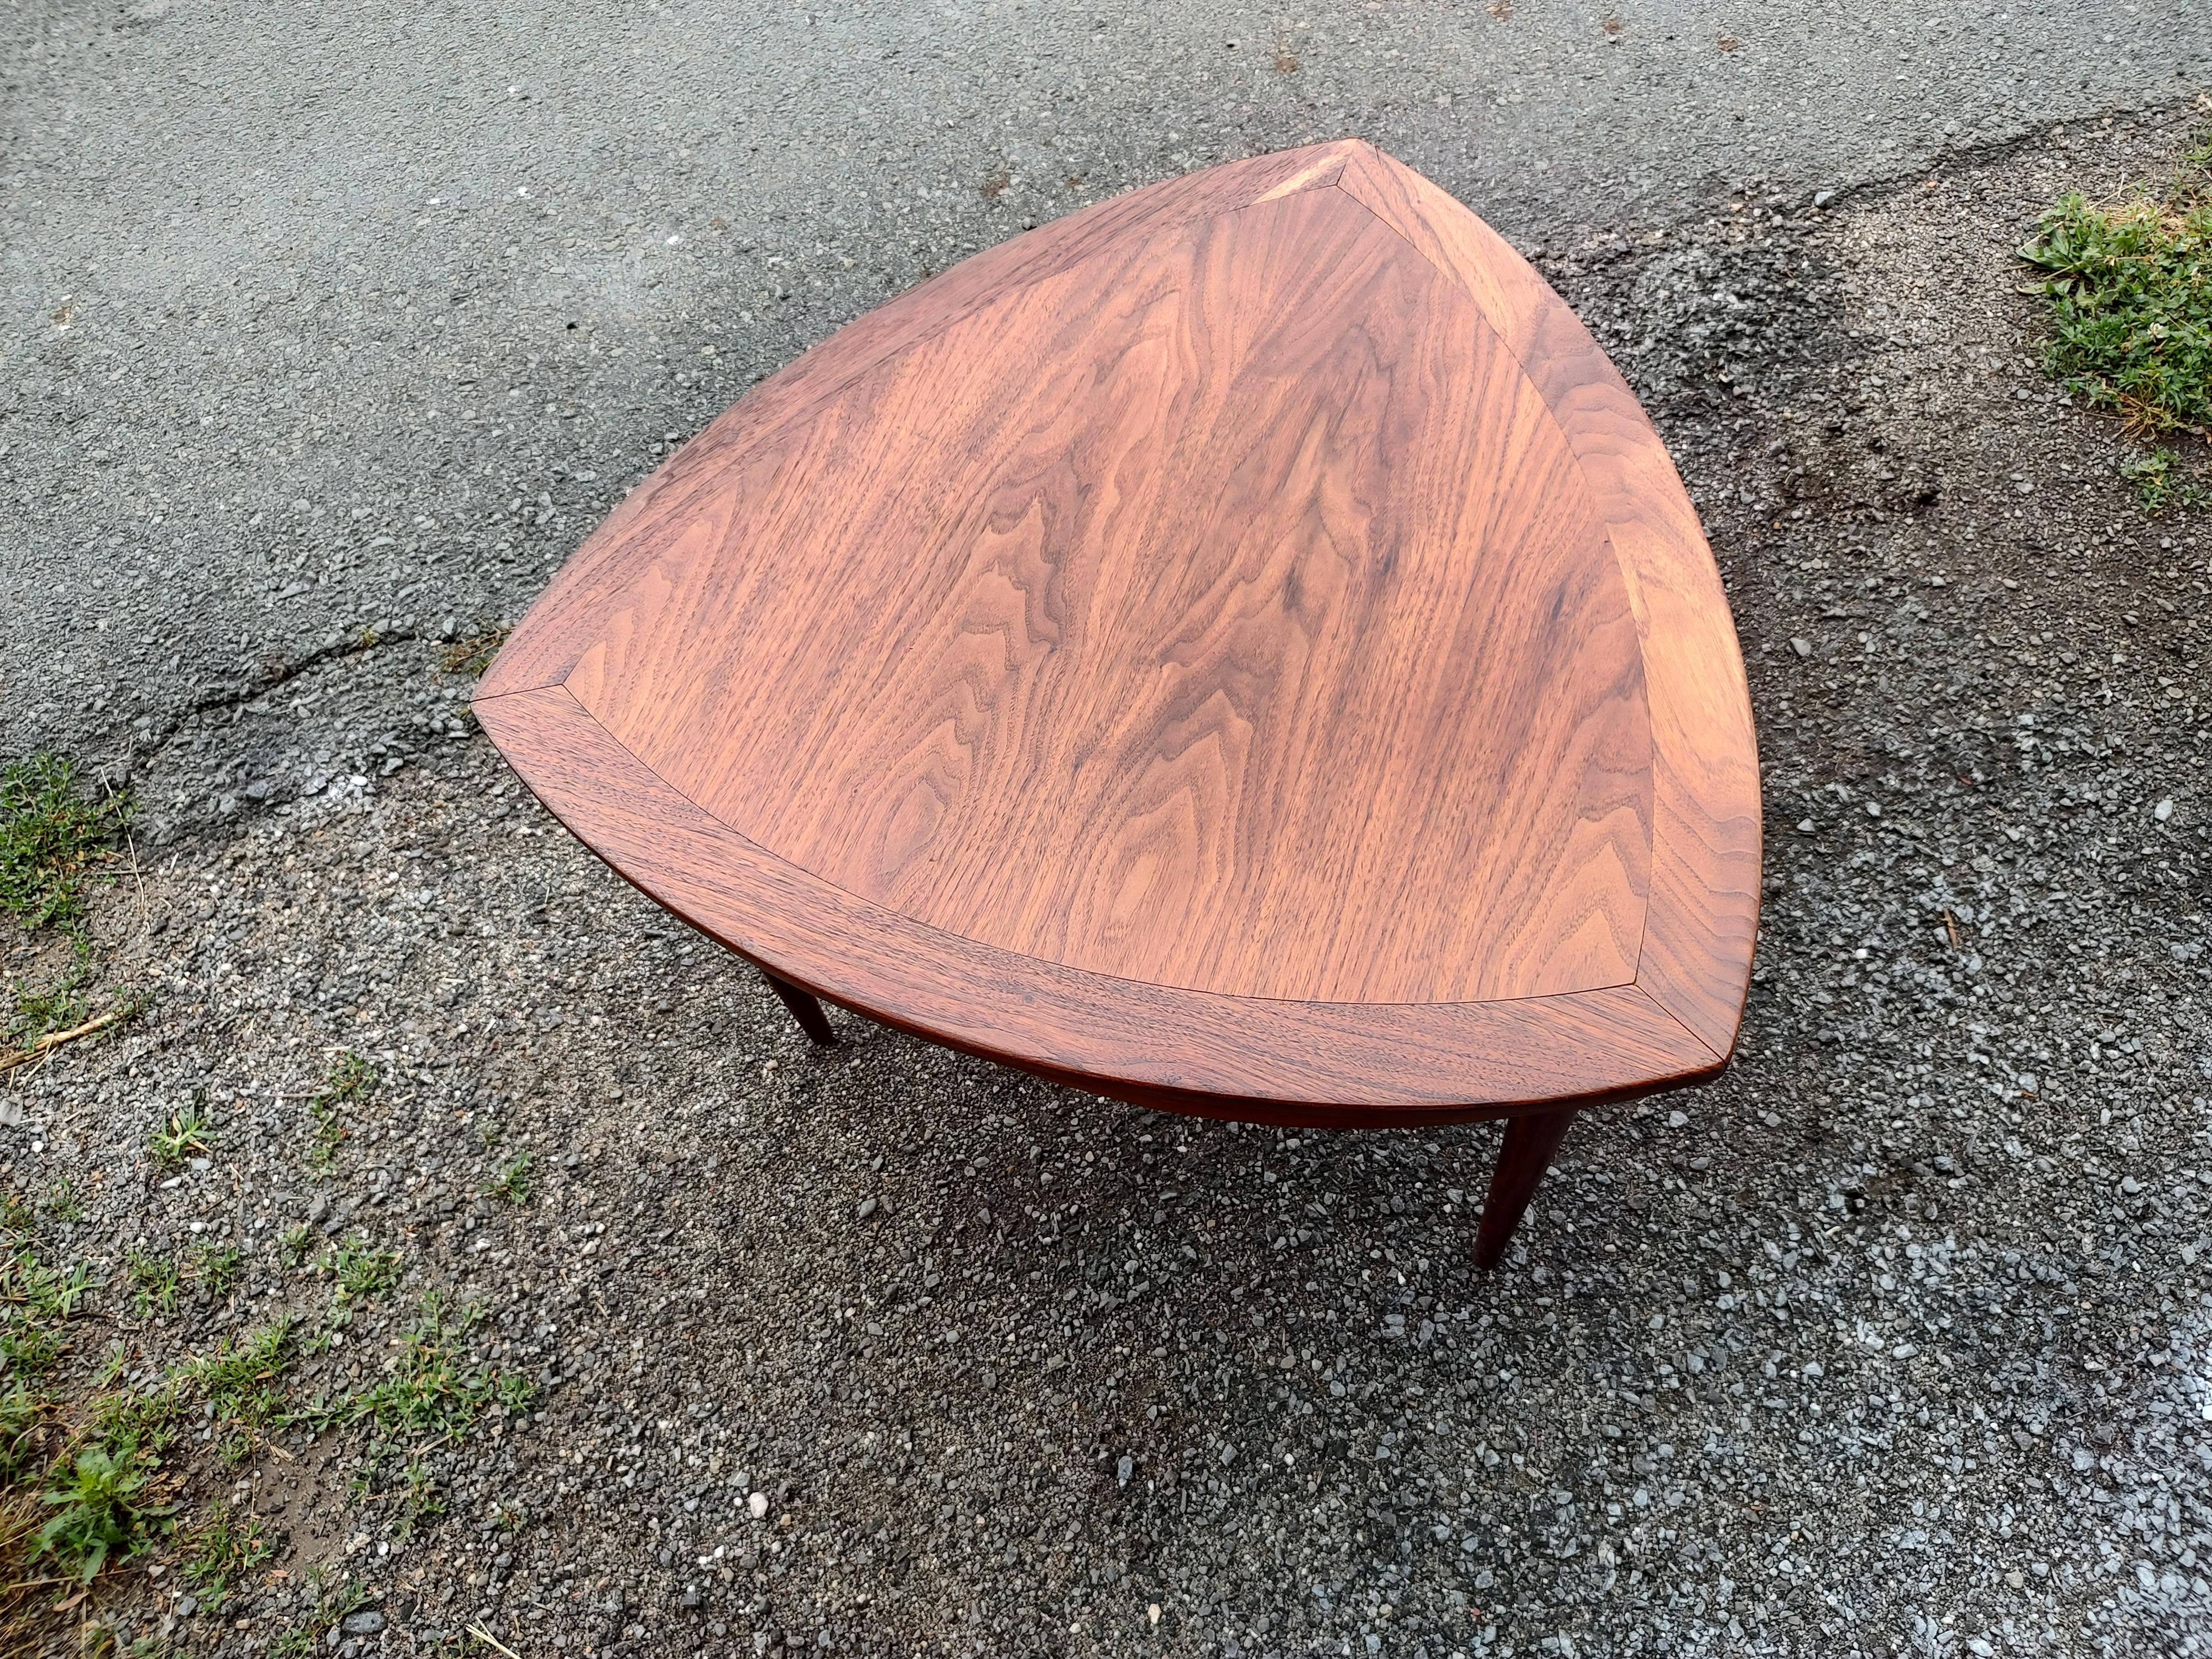 Simple and elegant cocktail table or a large side table. Measures: height is 20.25, width is 27.5. solid walnut with a shelf below for storage. Banded edge and turned legs. In excellent vintage condition with minimal wear.